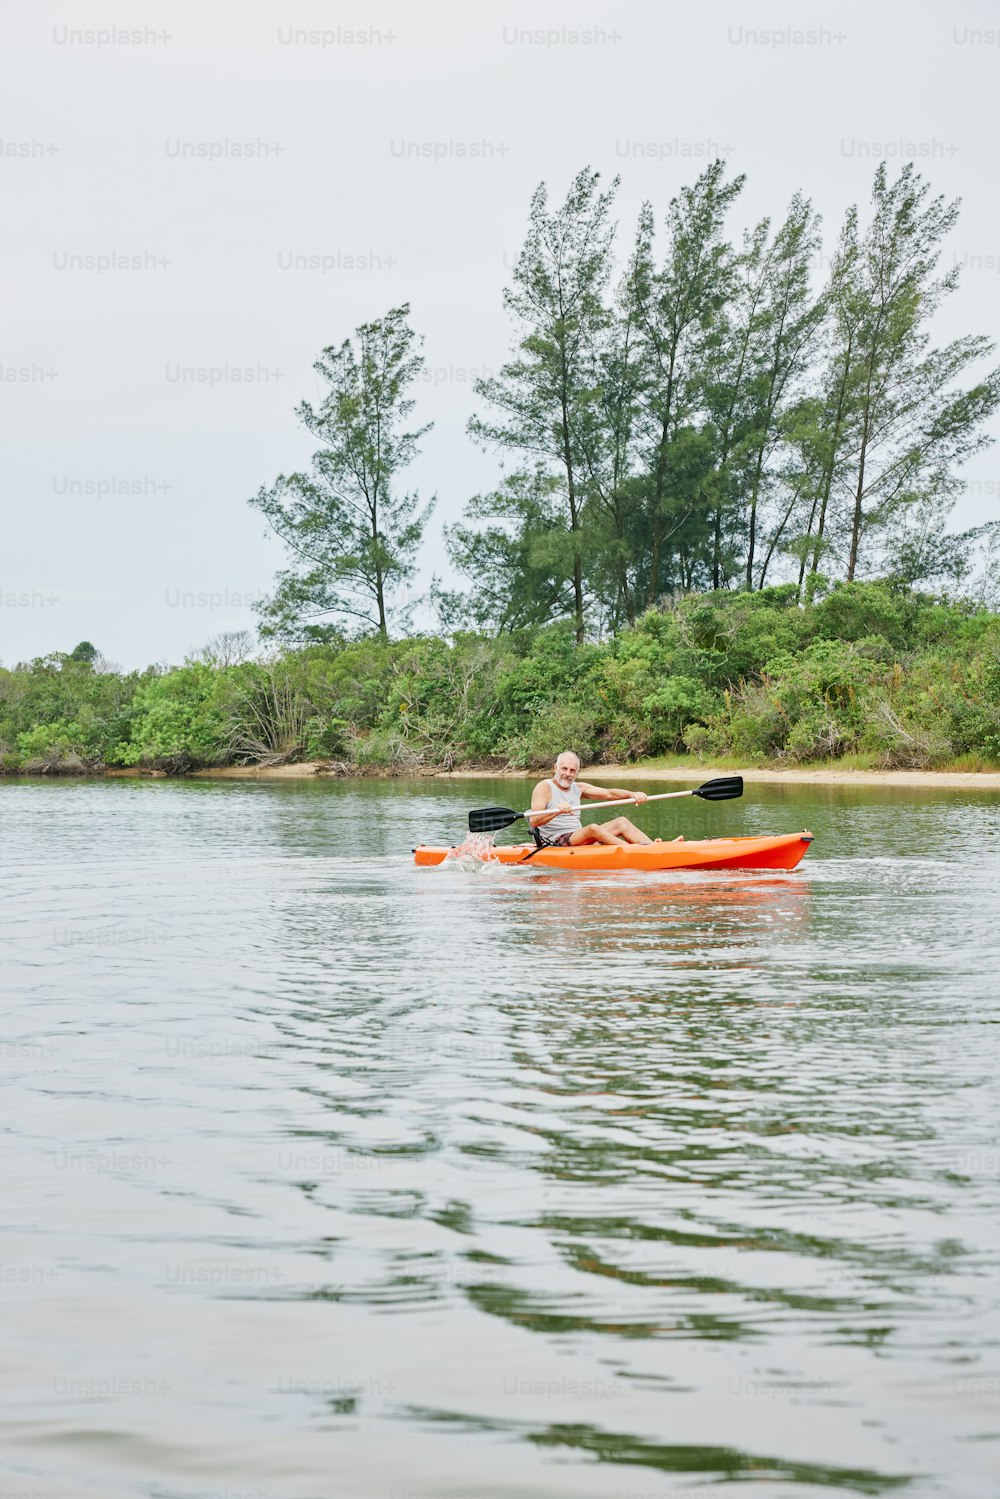 a woman is paddling a kayak on the water